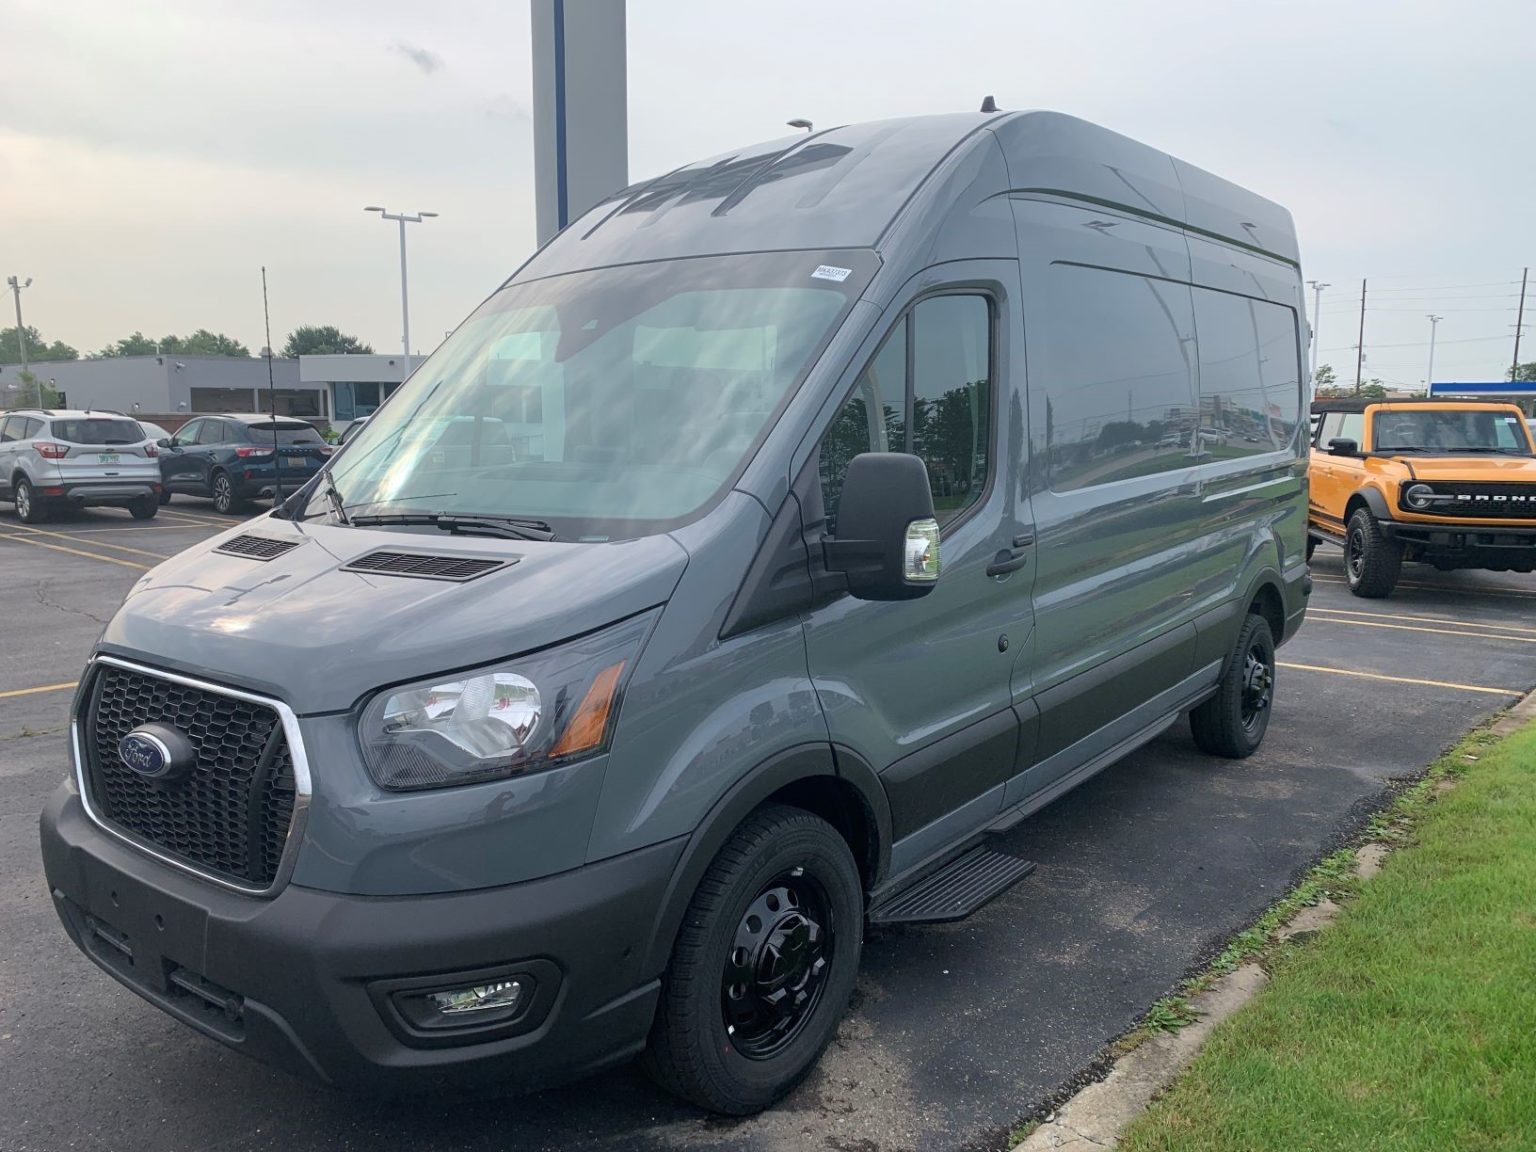 2022 Ford Transit #VanLife - Step One ~ Start of a Nomadic Adventure